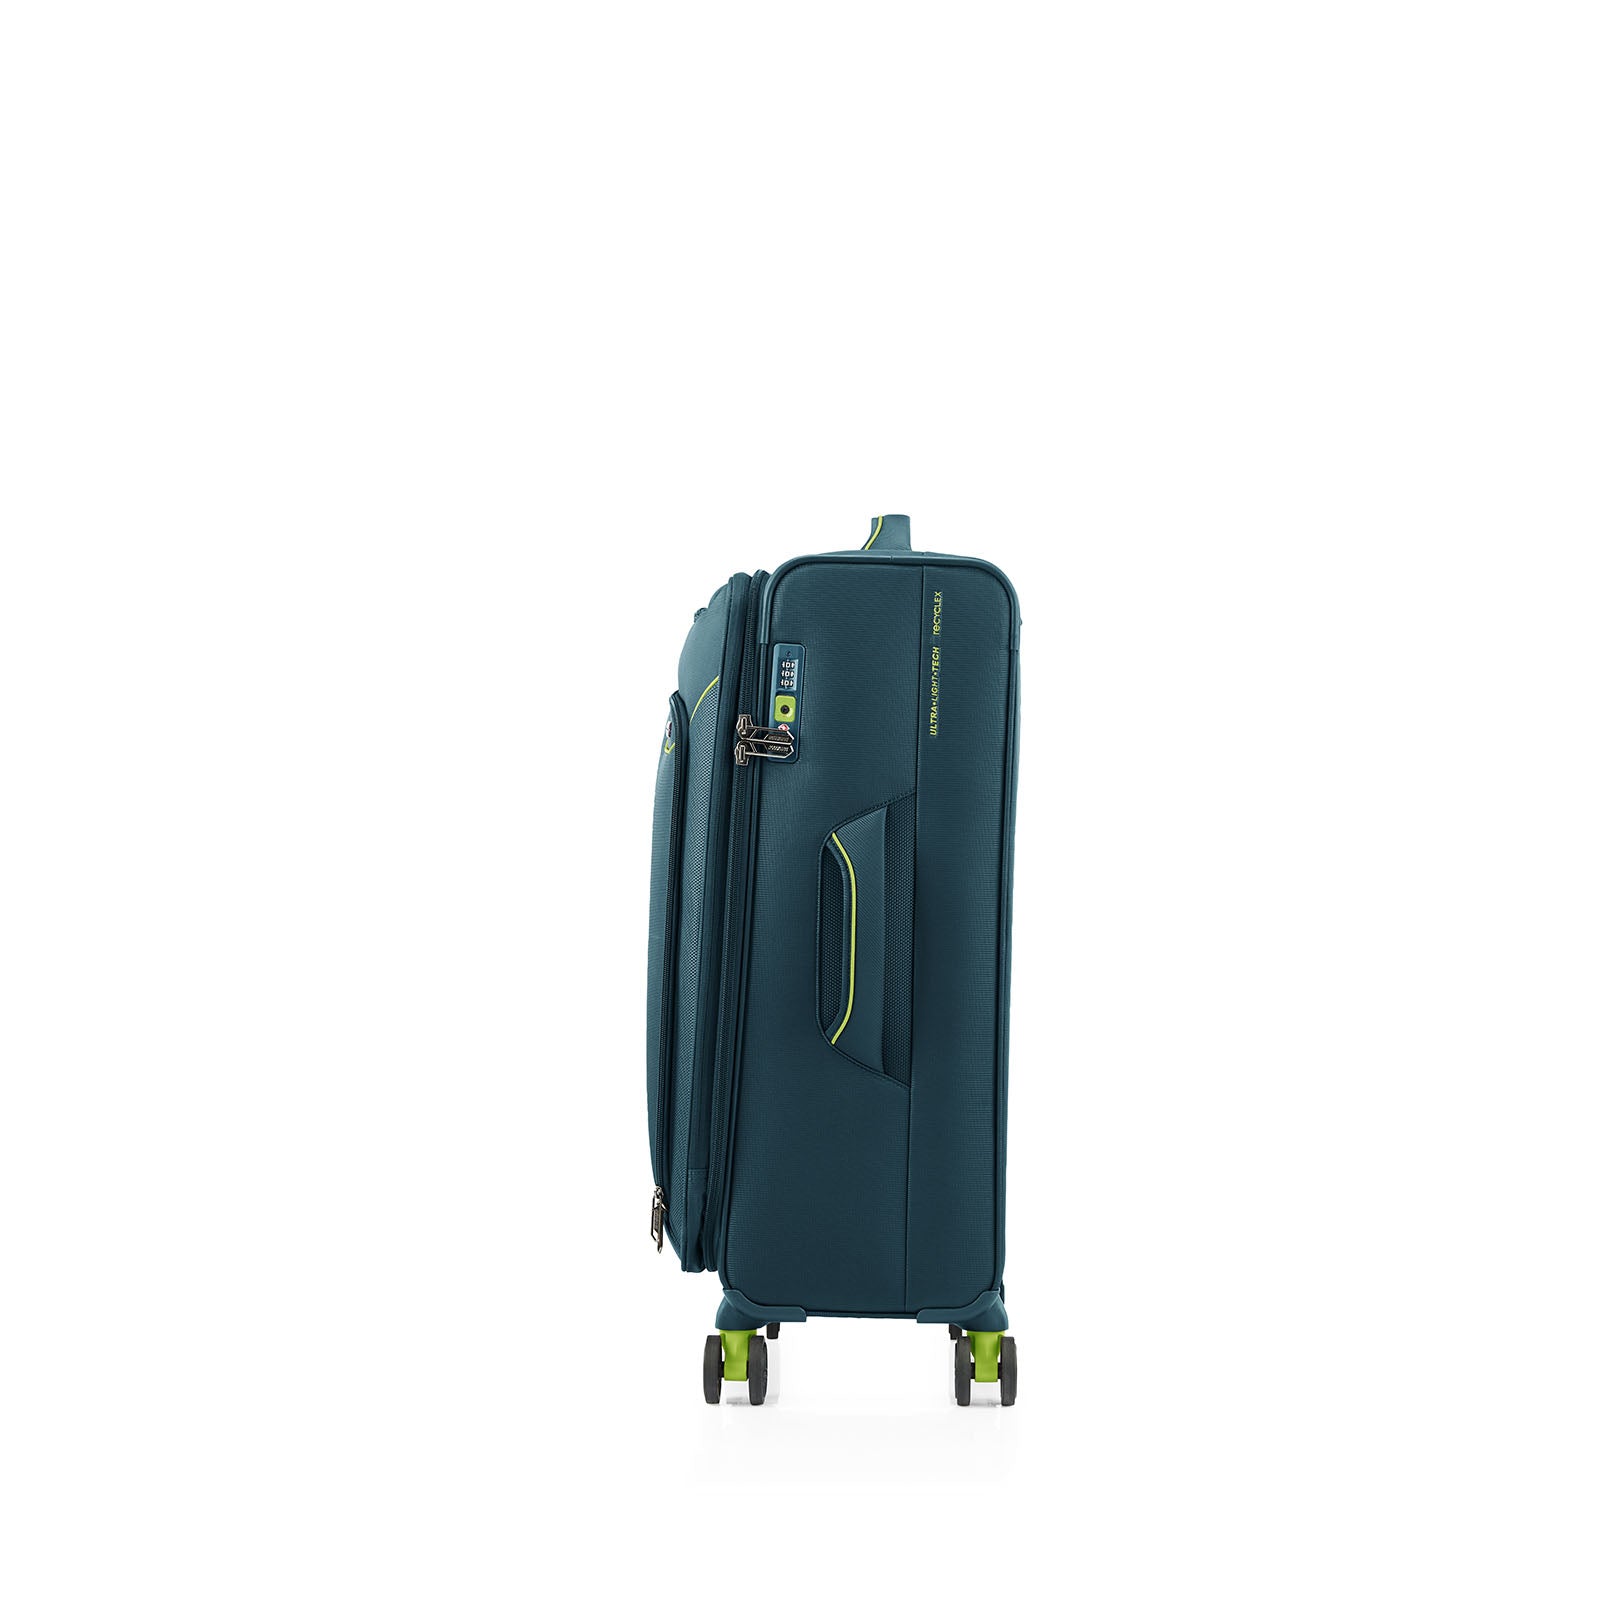 American-Tourister-Applite-4-Eco-71cm-Suitcase-Varsity-Green-Side